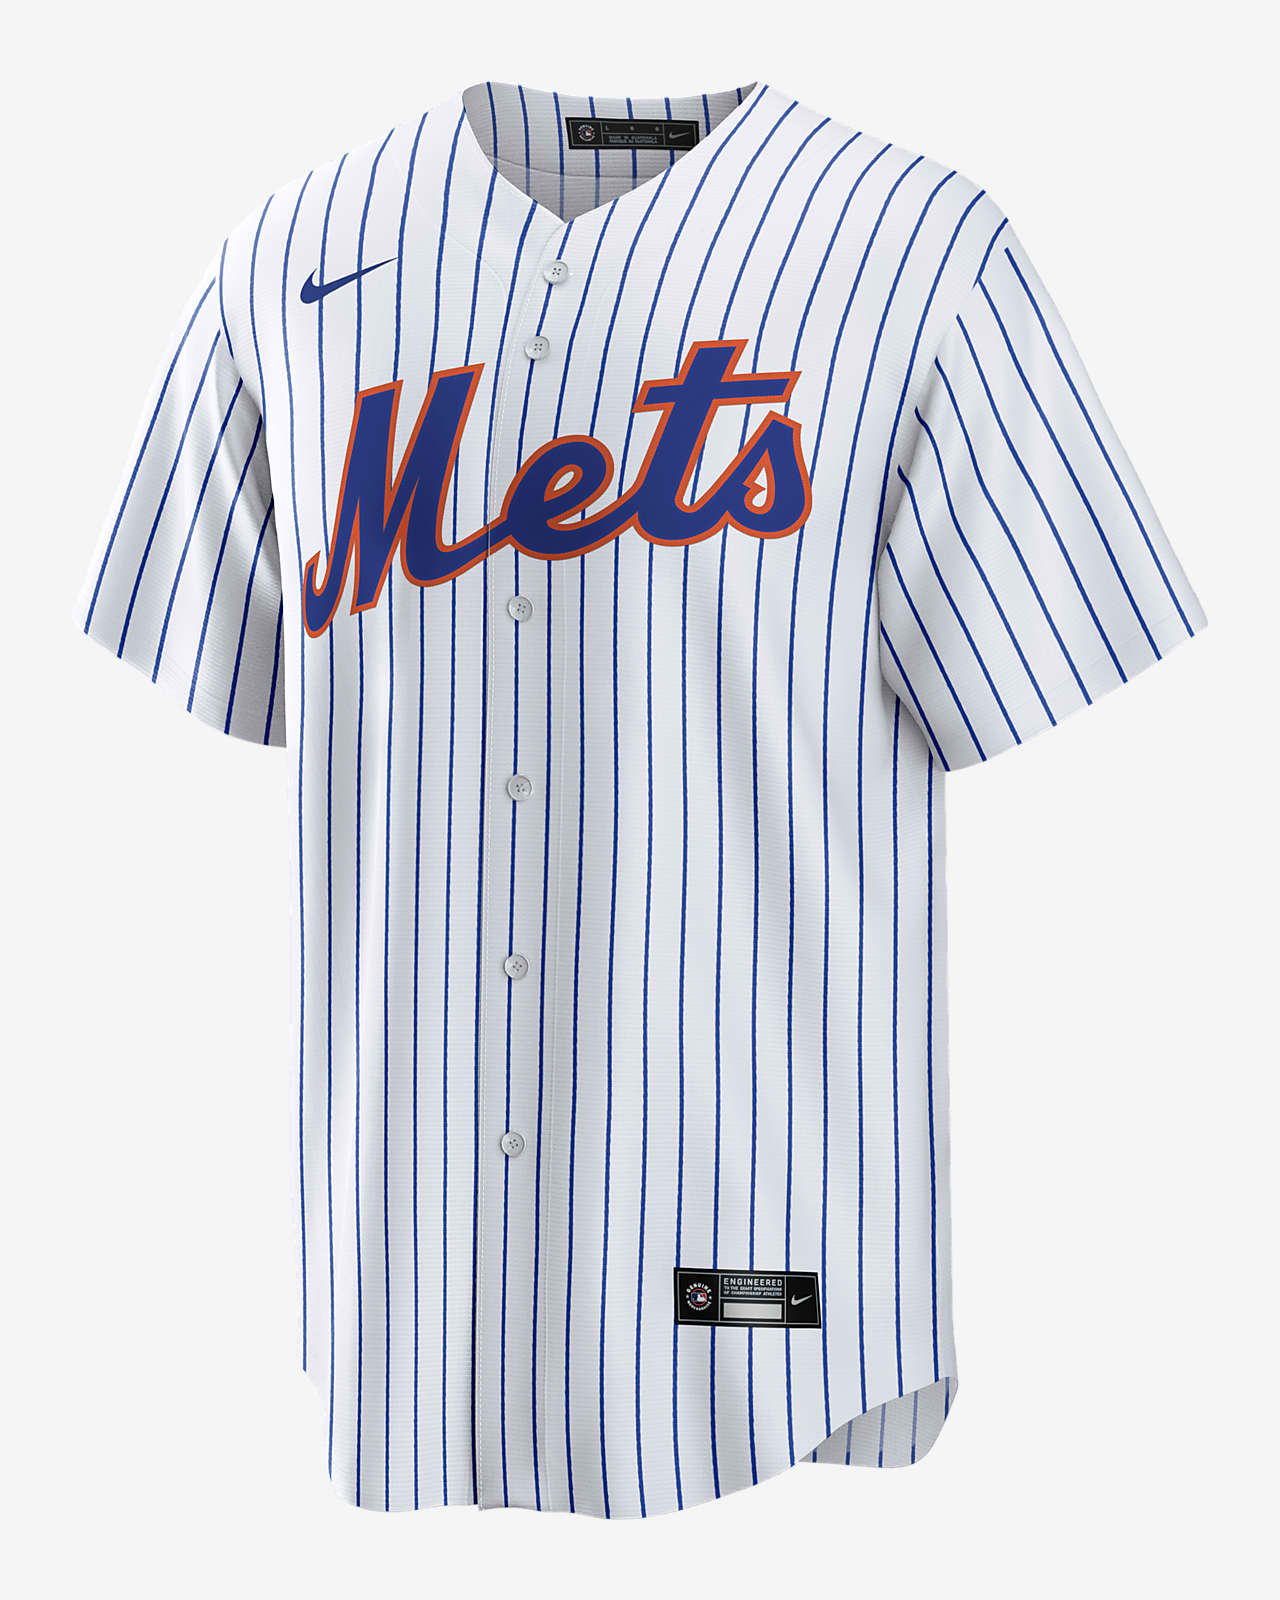 Nike MLB Jersey Template  Orion Taylor  Graphic Design